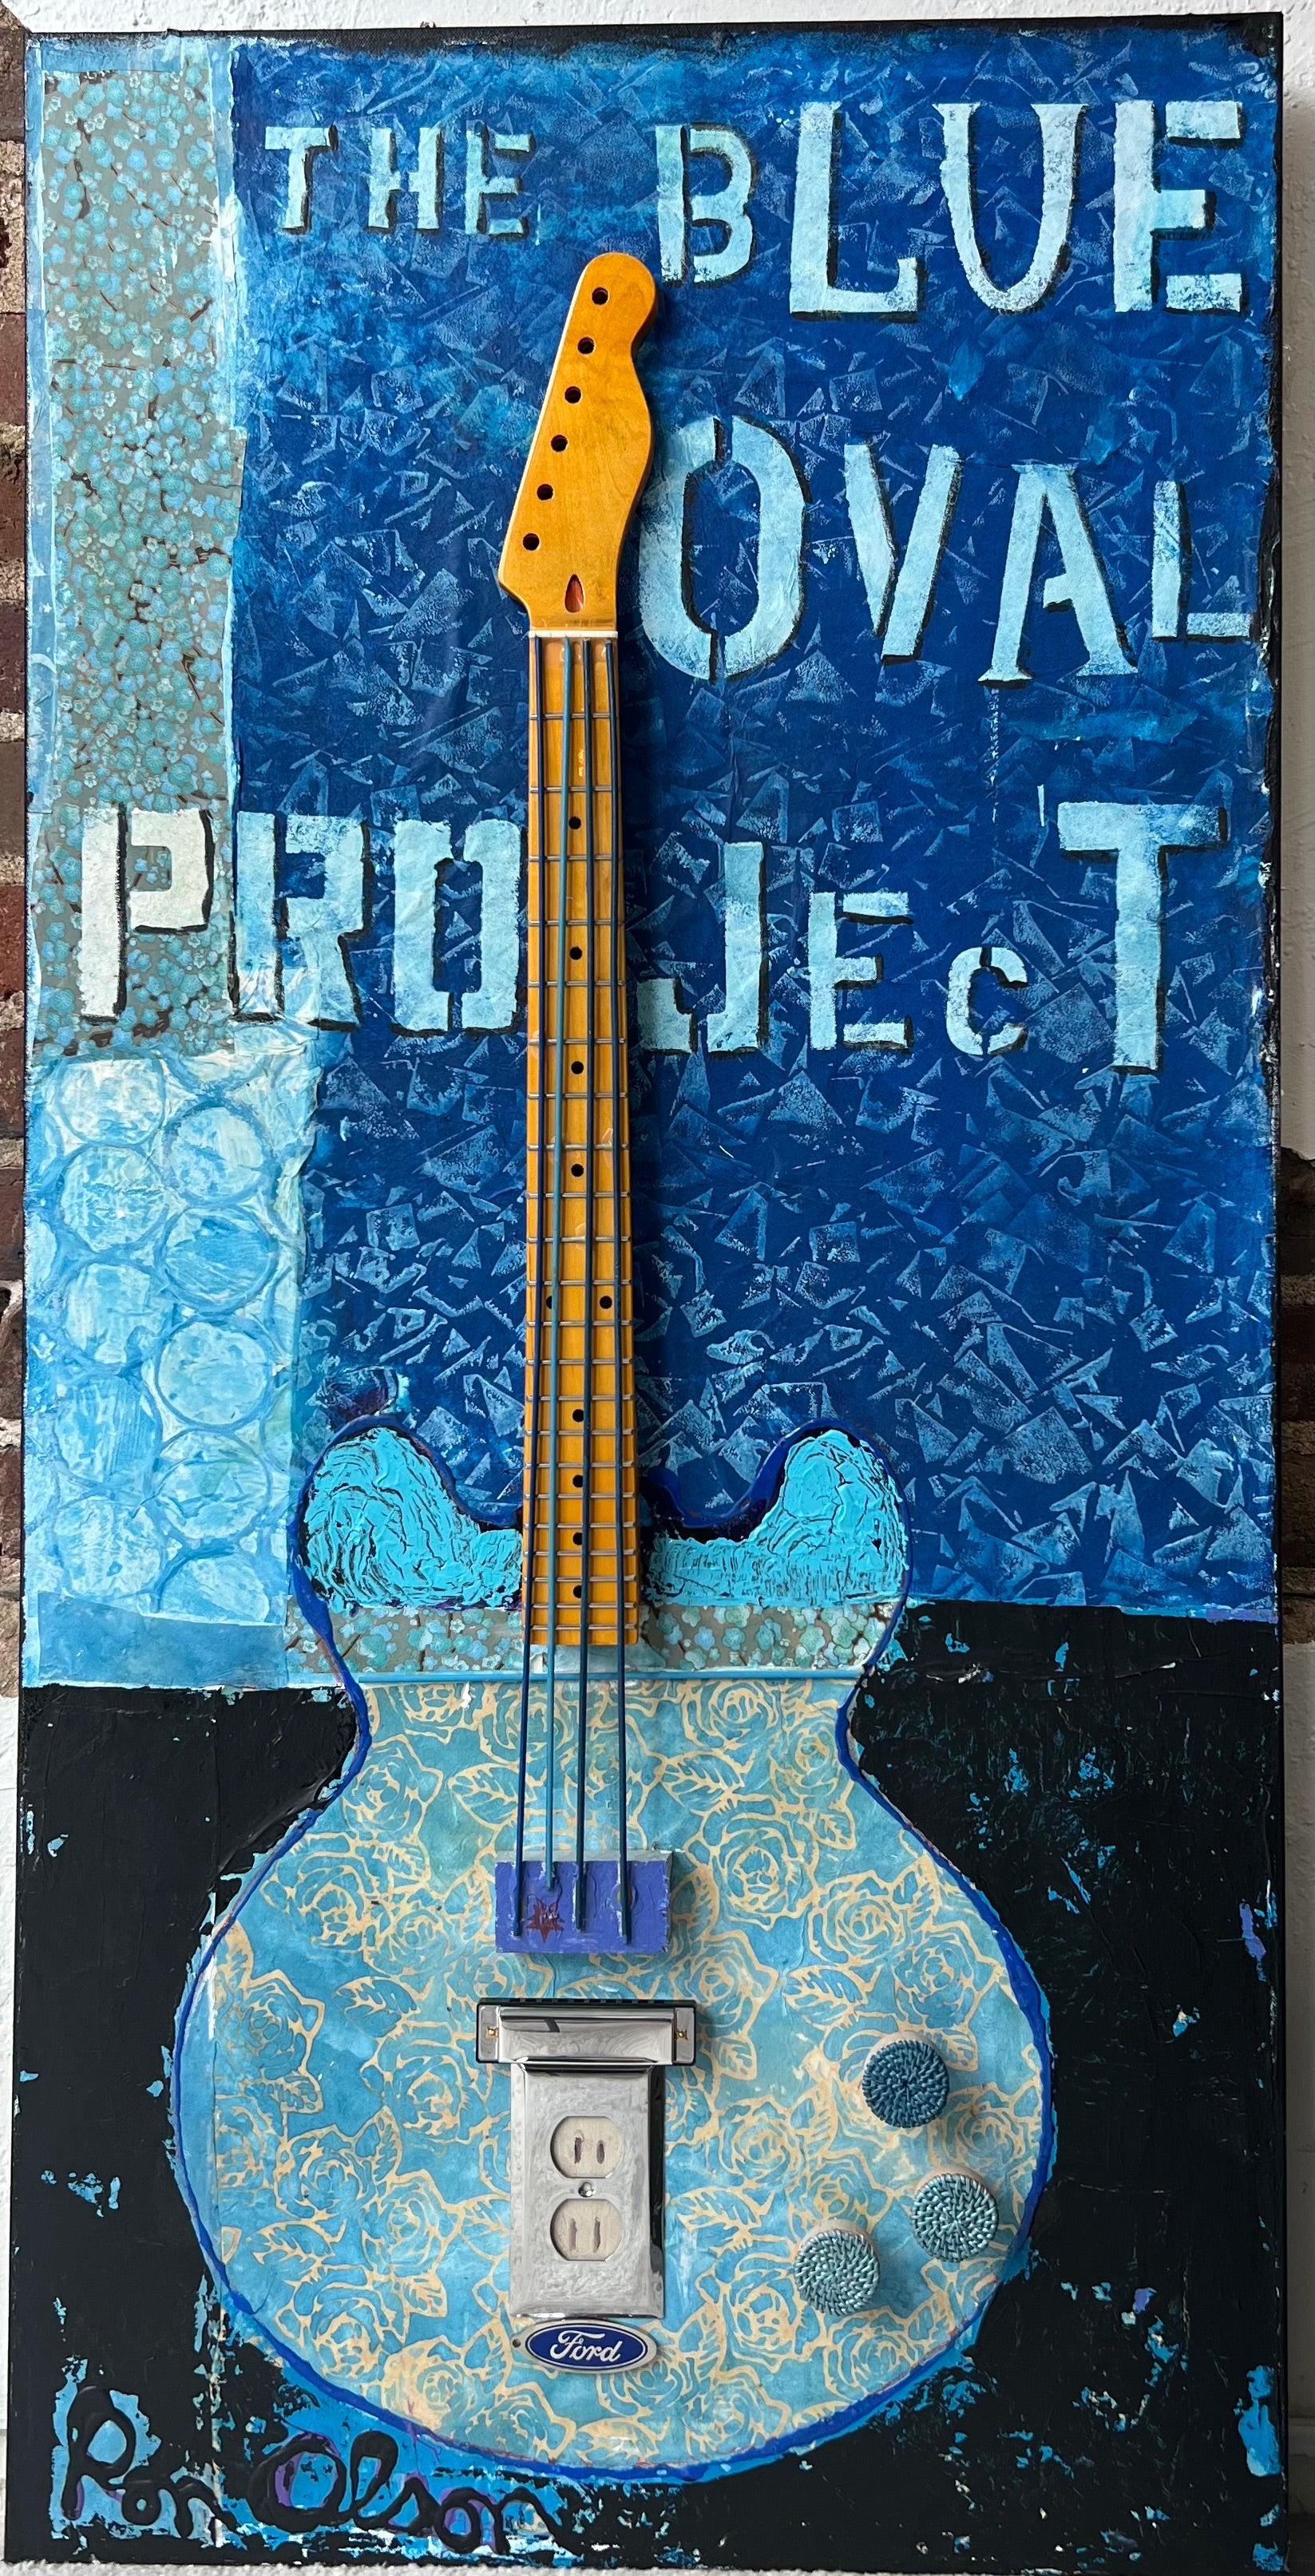 "The Blue Oval Project" Original By Ron Olson